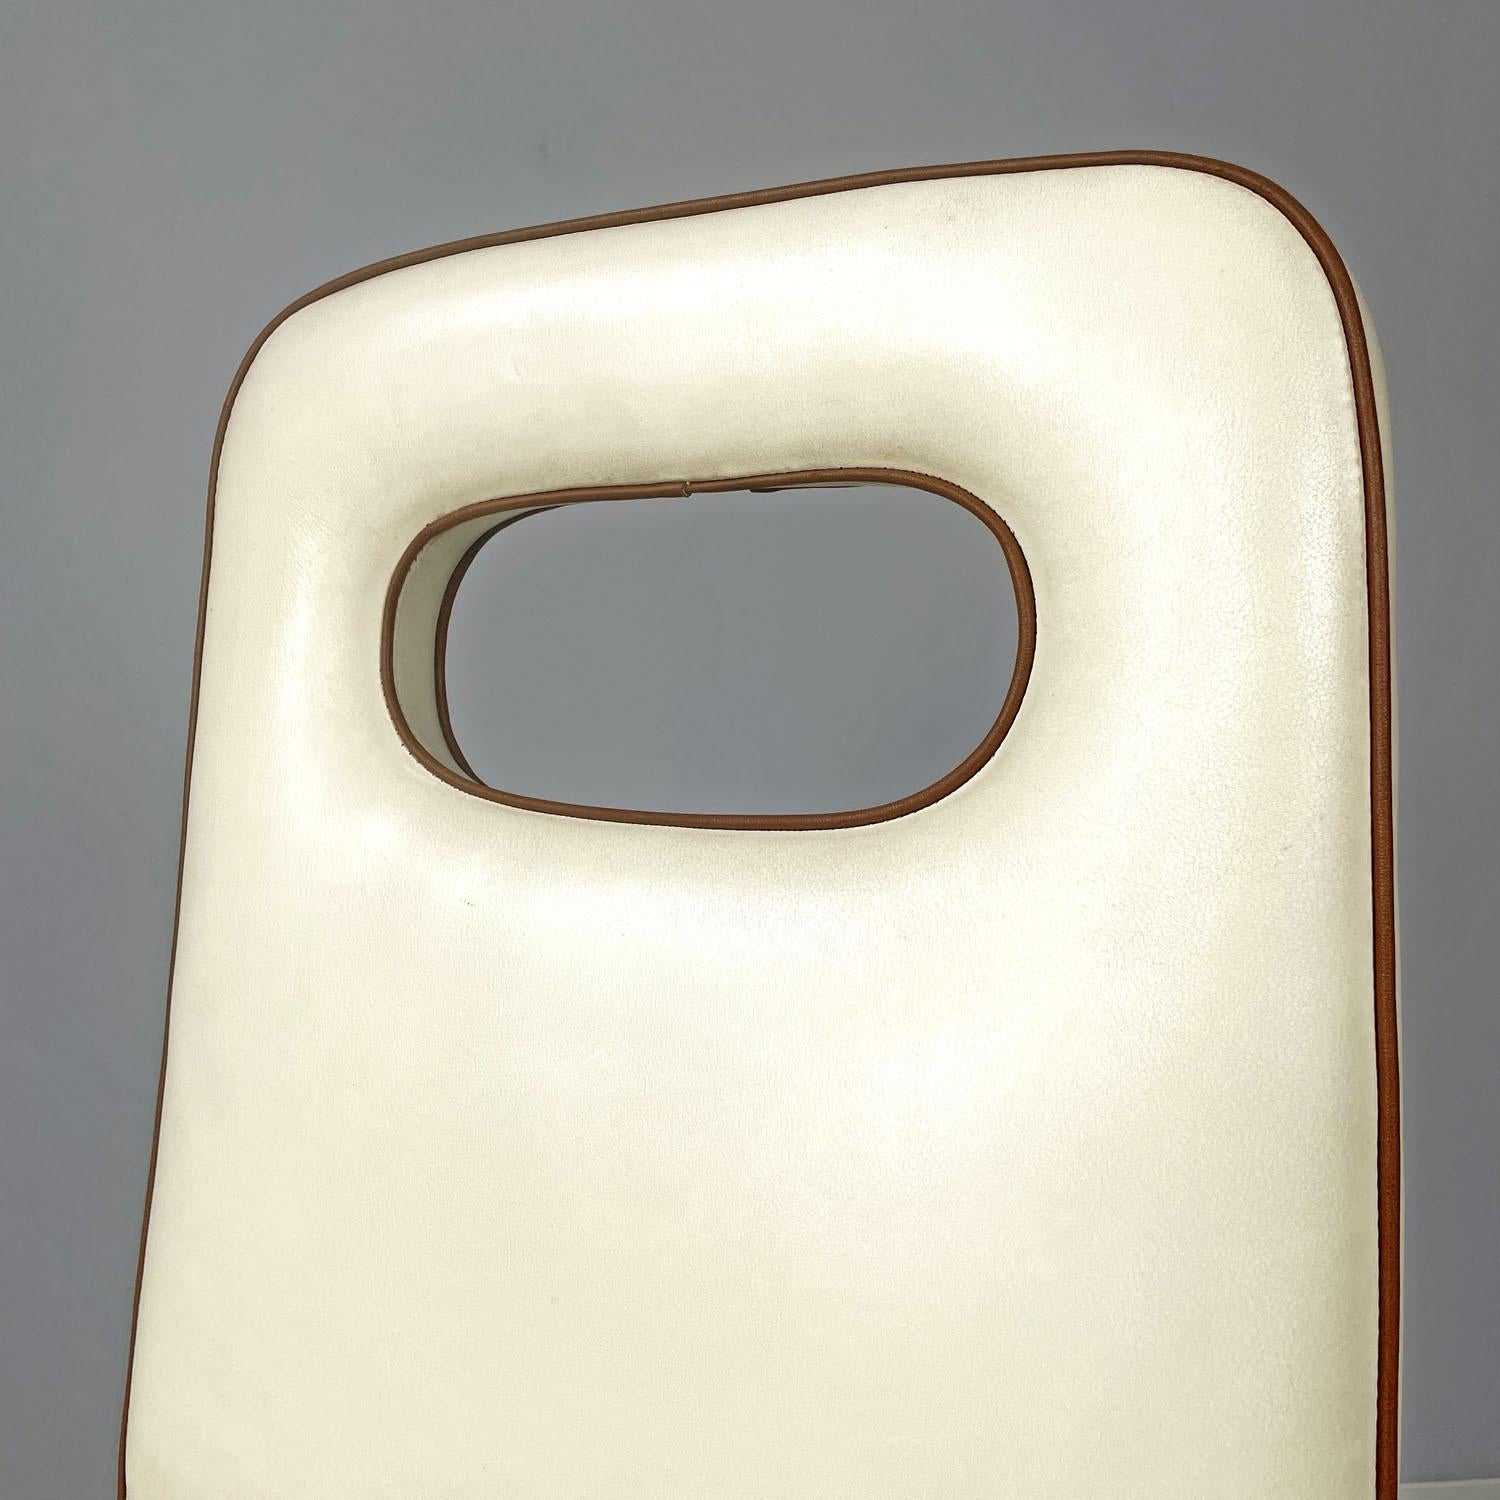 Italian Art Deco white leather and wood chair by Giovanni Gariboldi, 1940s For Sale 4